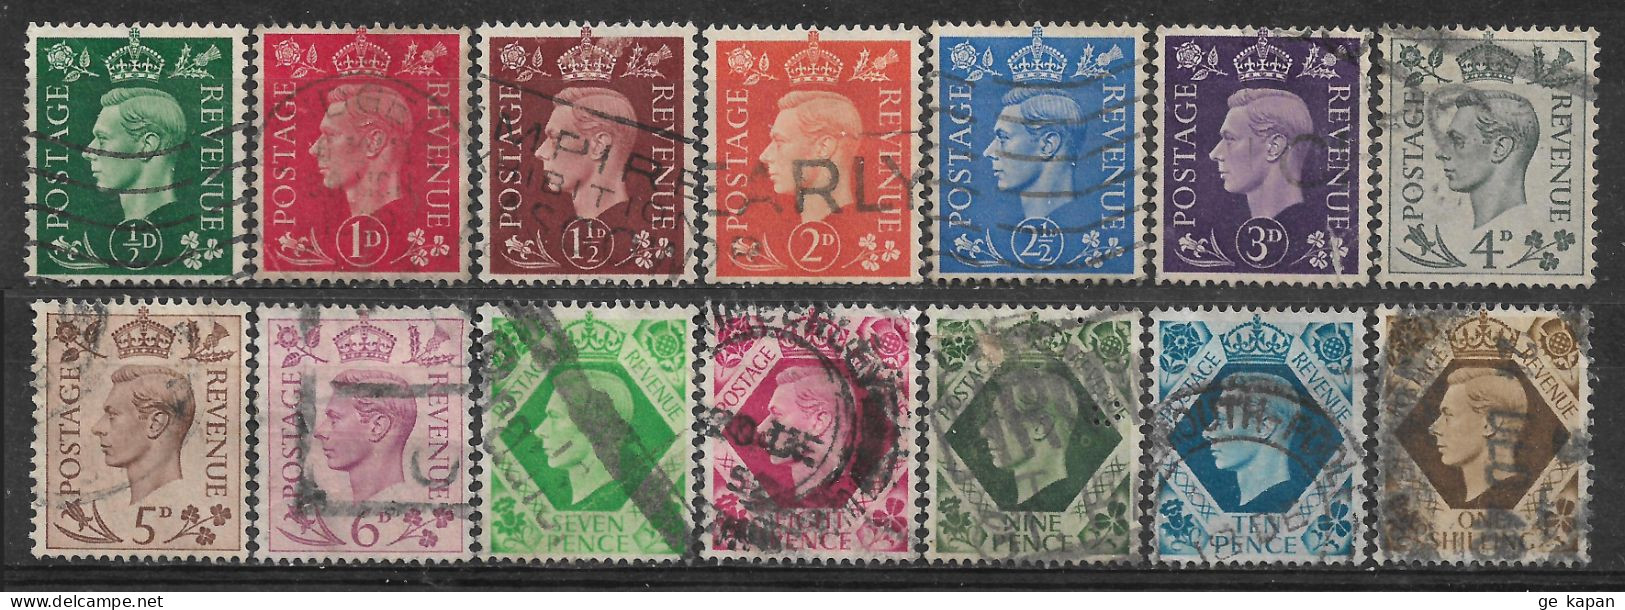 1937-1939 GREAT BRITAIN Complete Set Of 14 Used Stamps (Scott # 235-248) CV $9.10 - Usati